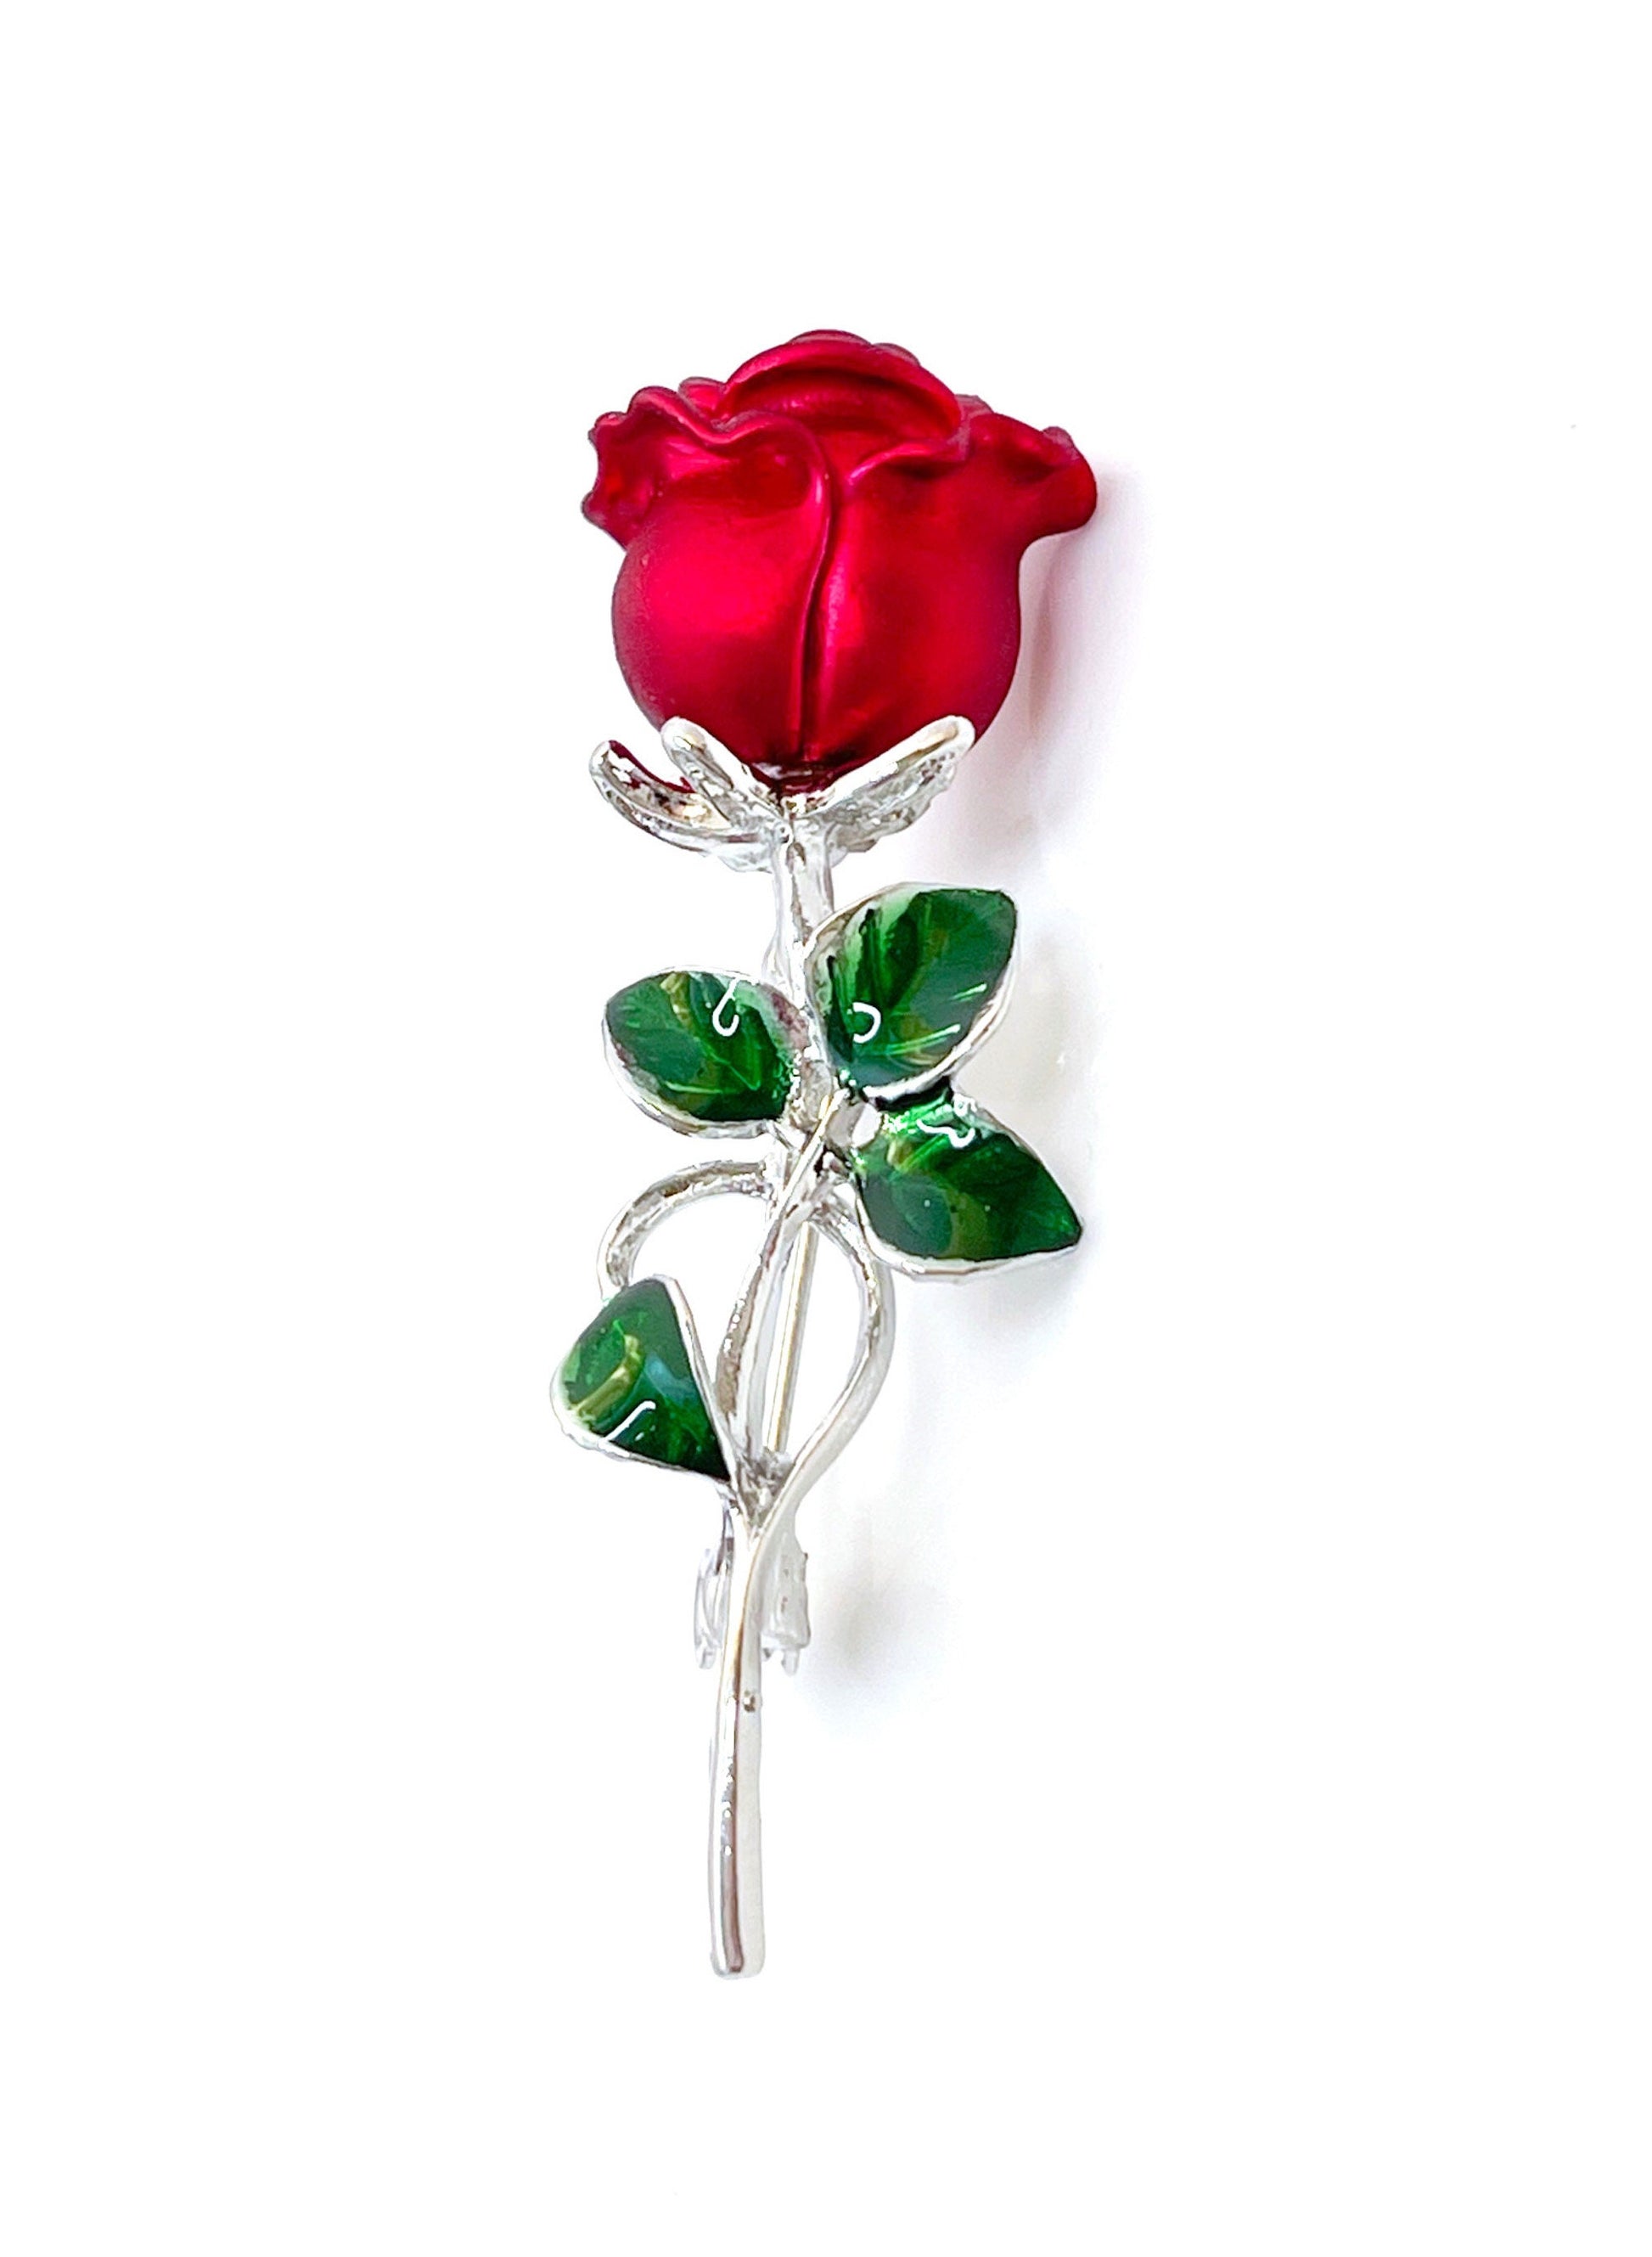 Pretty Single Red Rose Brooch, Red Silver Rose with Green Leaves, Flower Jacket Pin, Brooches For Women